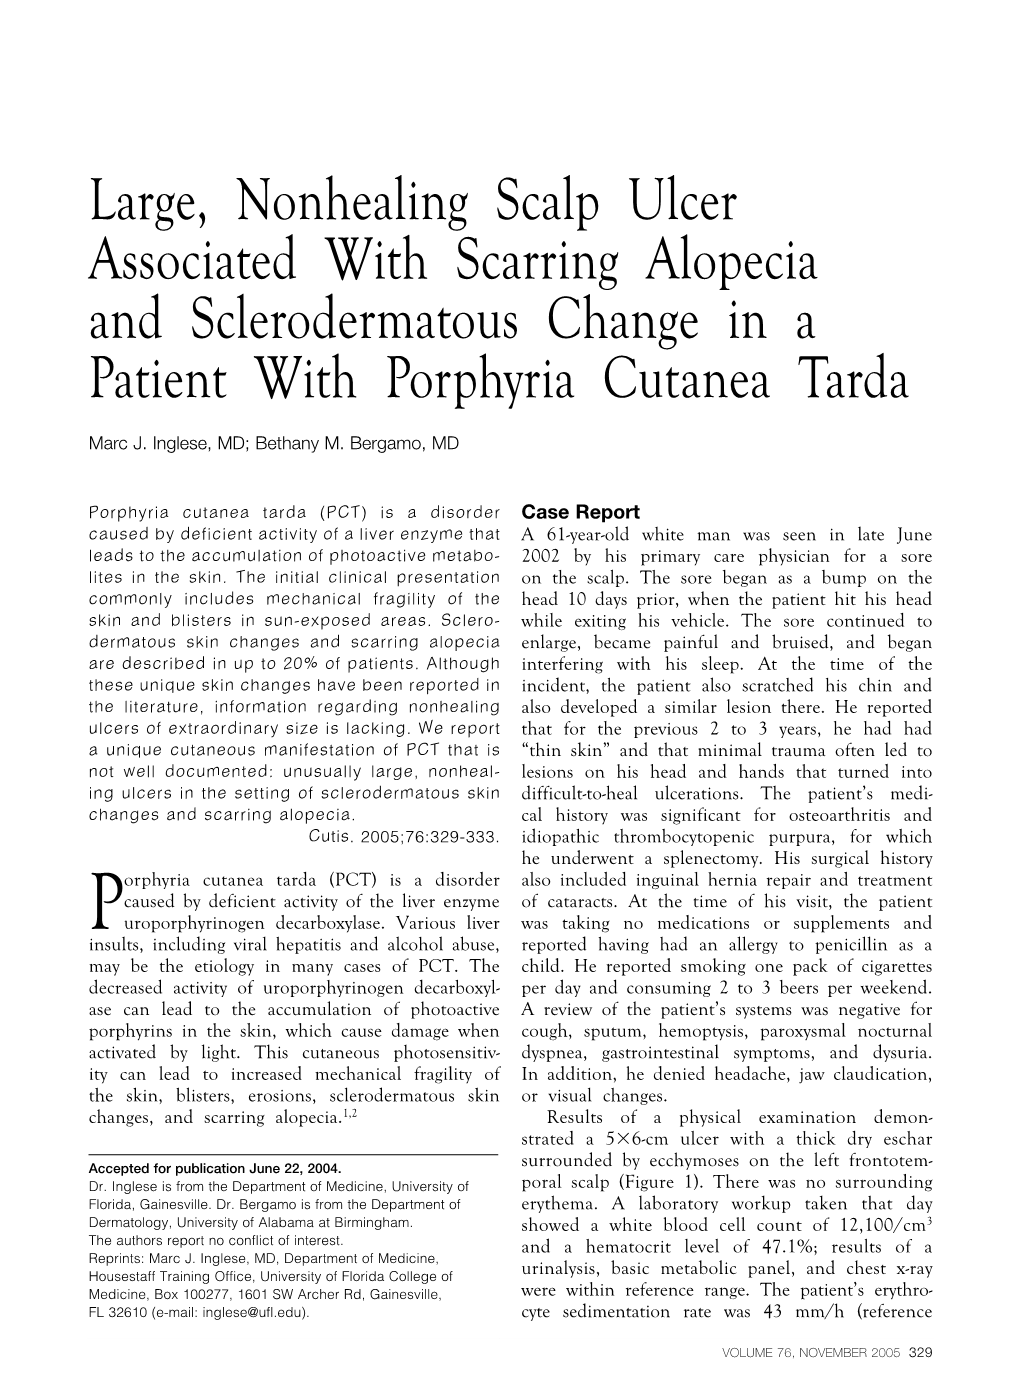 Large, Nonhealing Scalp Ulcer Associated with Scarring Alopecia and Sclerodermatous Change in a Patient with Porphyria Cutanea Tarda